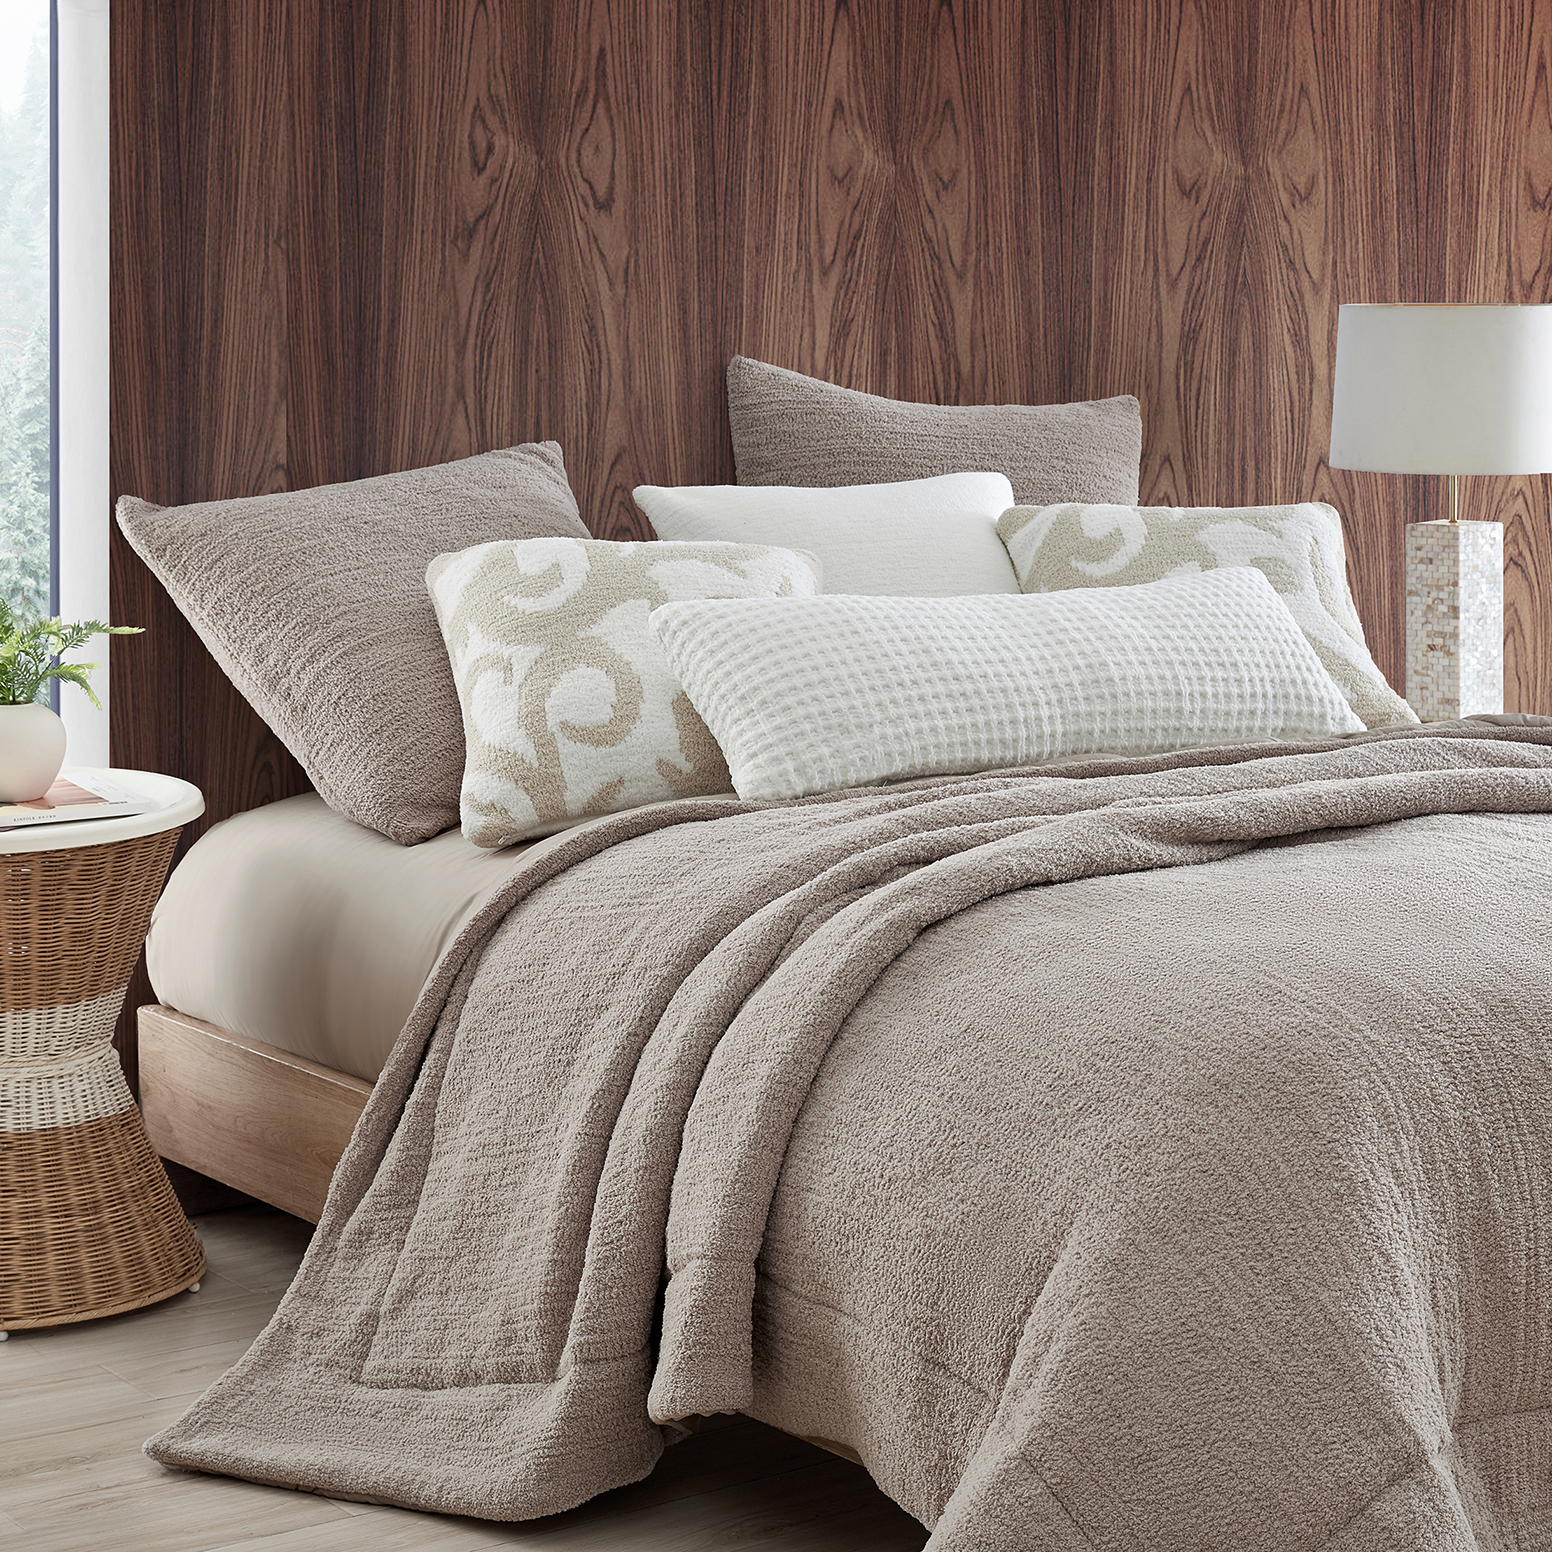 What is a Pillow Sham? Sunday Citizen's Snug Comforter in Taupe. Snug Euro Sham in Taupe. Sunday Citizen patterned throw pillows. Taupe colored bed with lots of different pillows.